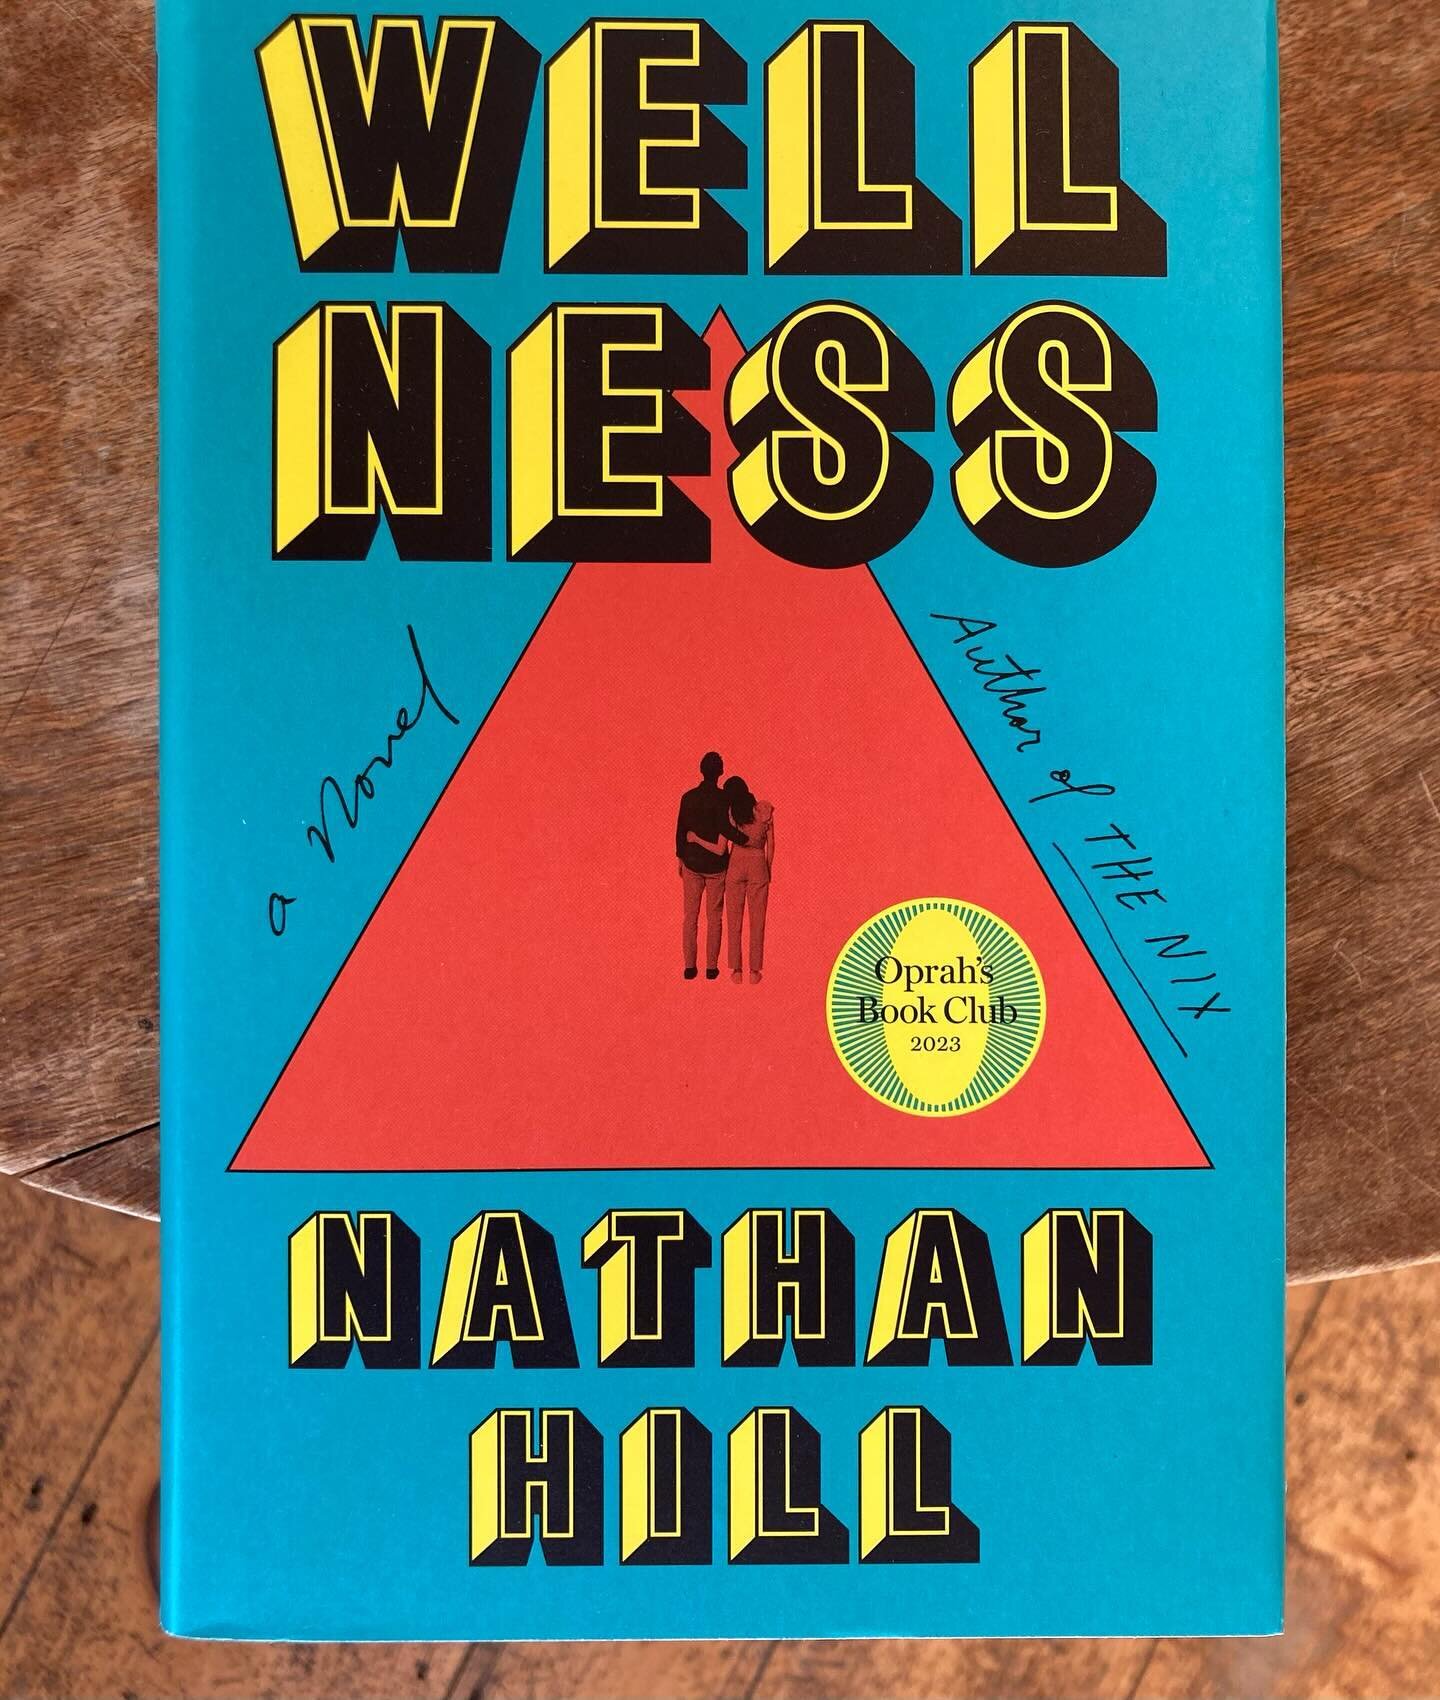 Where to even begin unpacking this one?! 📚 Wellness is a glorious, mile-high construct, ostensibly the story of Elizabeth and Jack, who fall in love in the early 1990's and by the late 2000's find themselves juggling a complicated son, career frustr